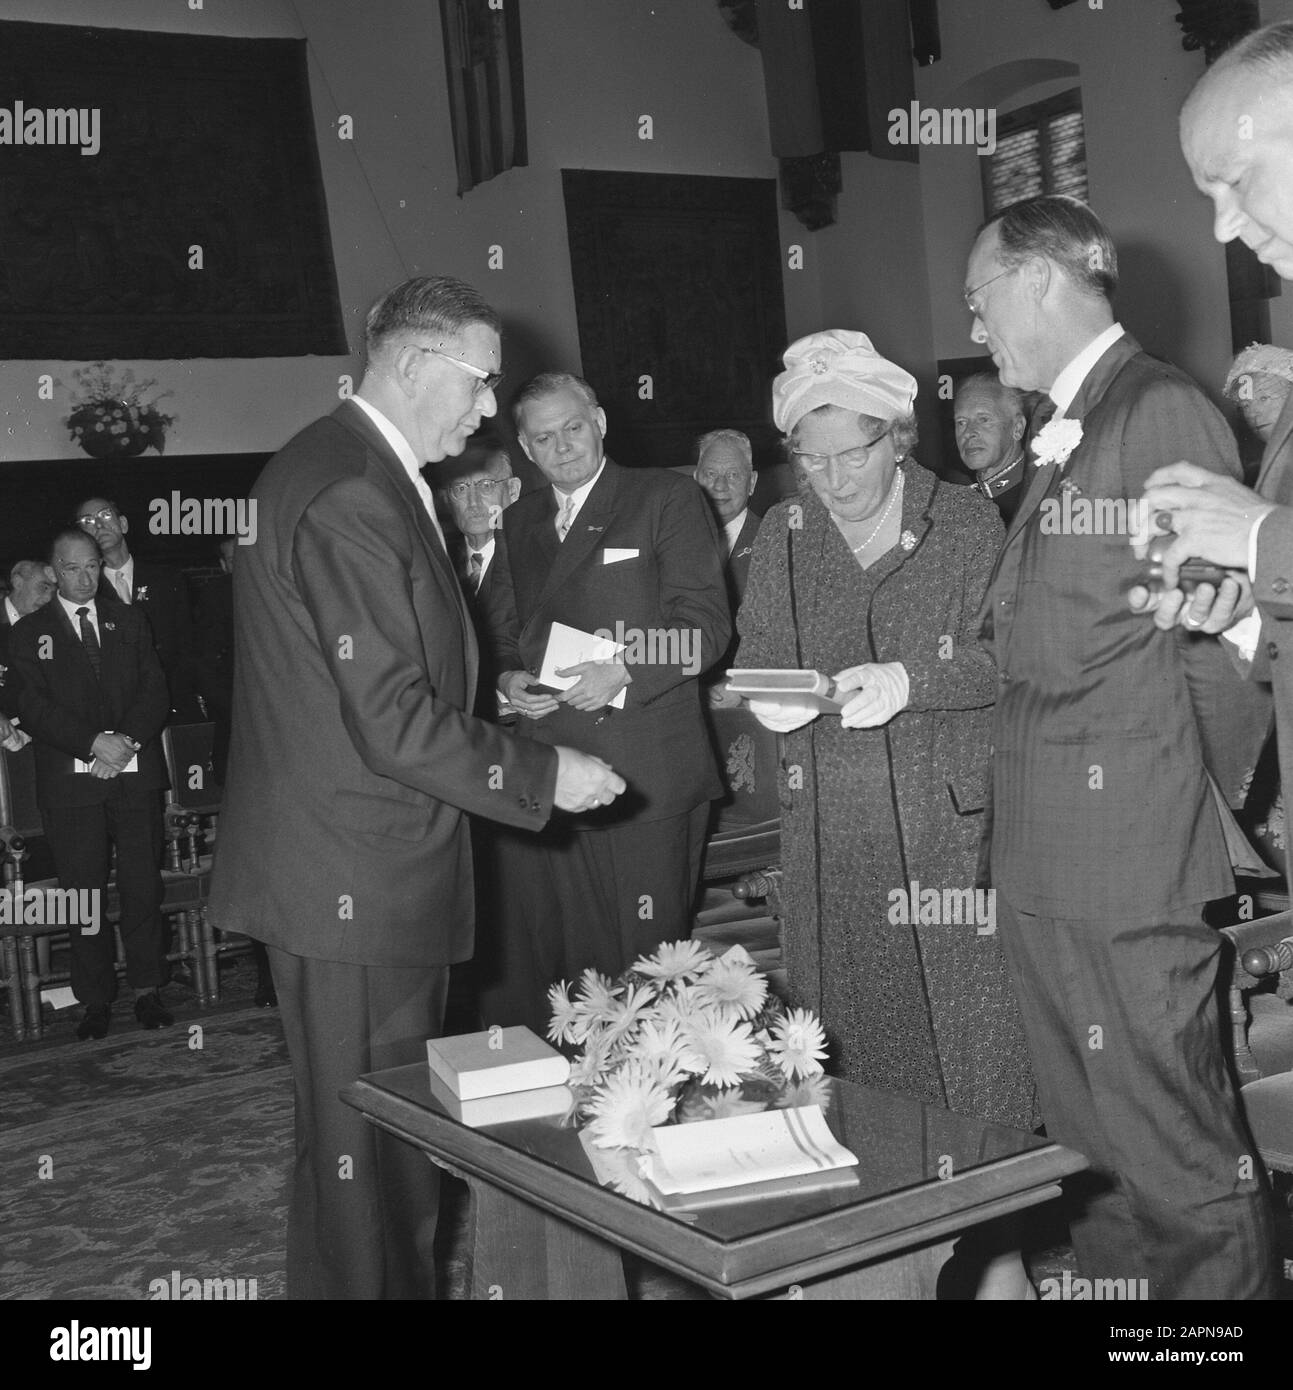 Freedom slustrum ex-political prisoners in The Hague  Queen Juliana receives a book and prince Bernhard a special badge Date: 23 June 1965 Location: The Hague, Zuid-Holland Keywords: books, queens, tokens, princes Personal name: Bernhard (prince Netherlands), Bernhard, prince, Juliana (queen Netherlands) Stock Photo